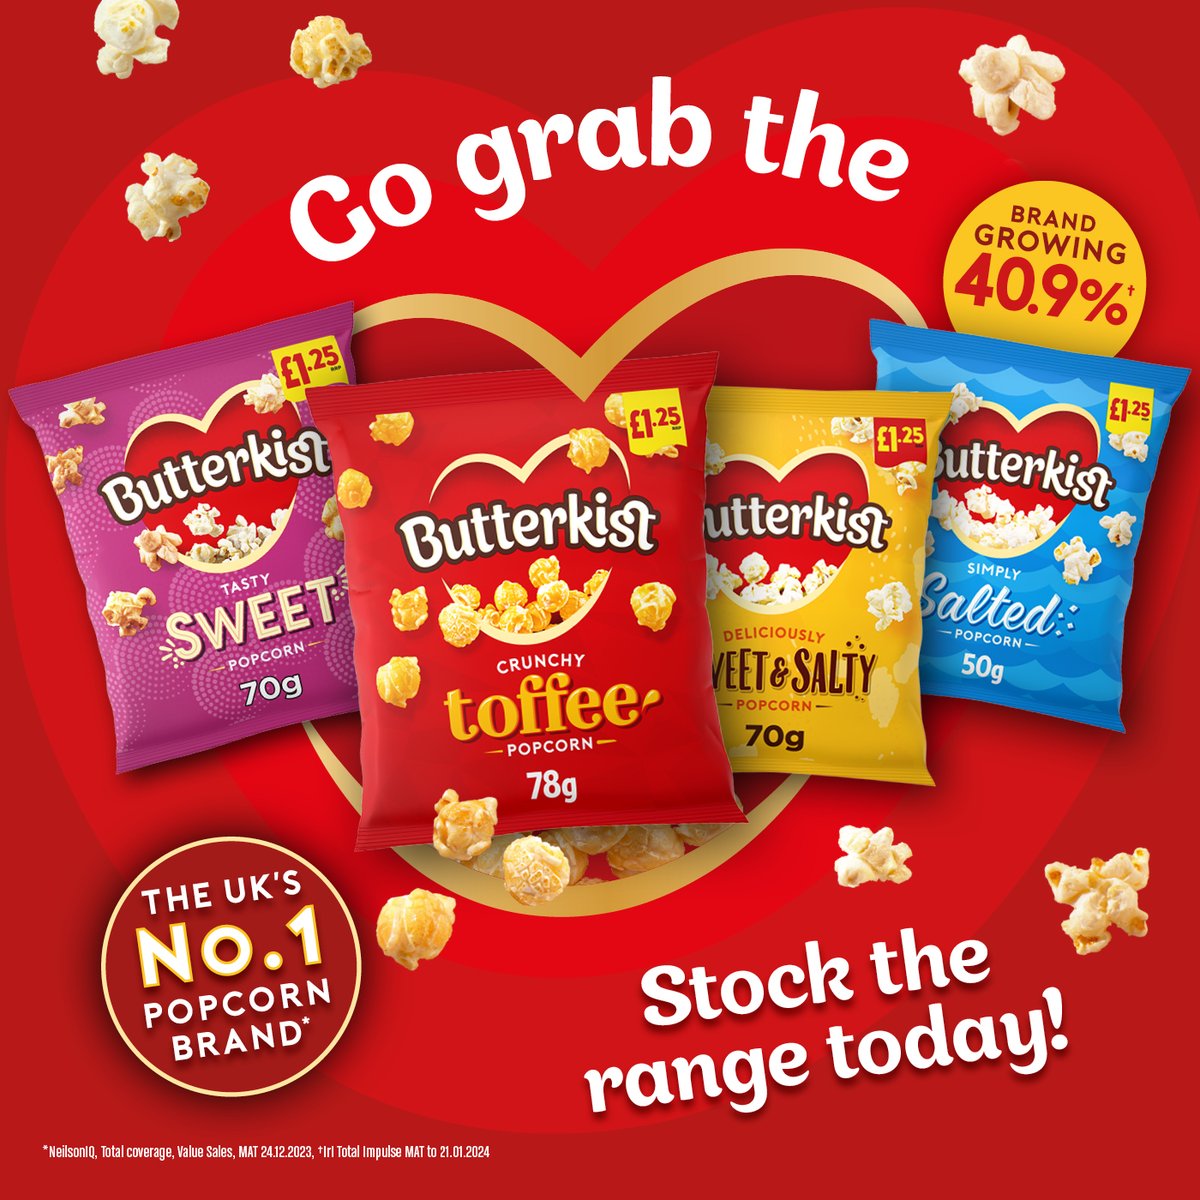 Stock up on the perfect weekend treat for your customers 🍿